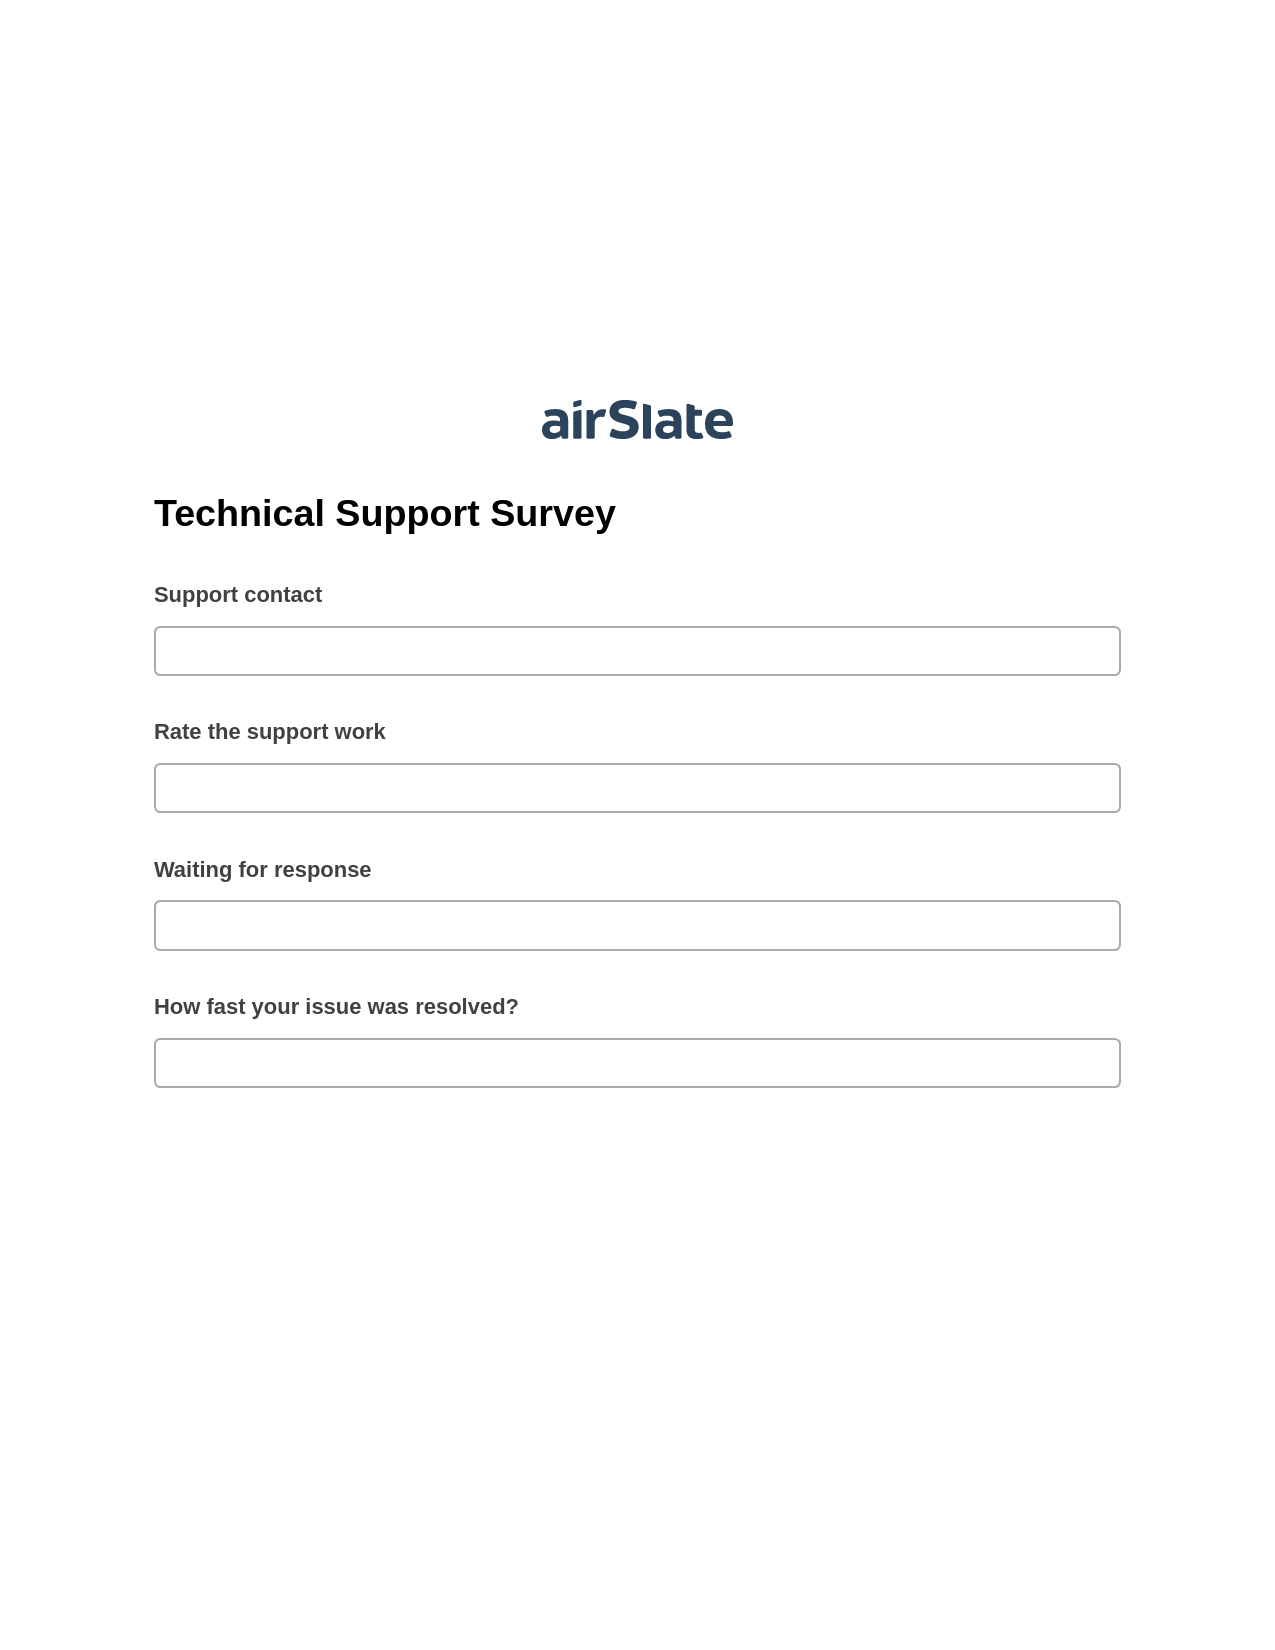 Technical Support Survey Pre-fill from another Slate Bot, Create NetSuite Record bot, Export to Salesforce Record Bot